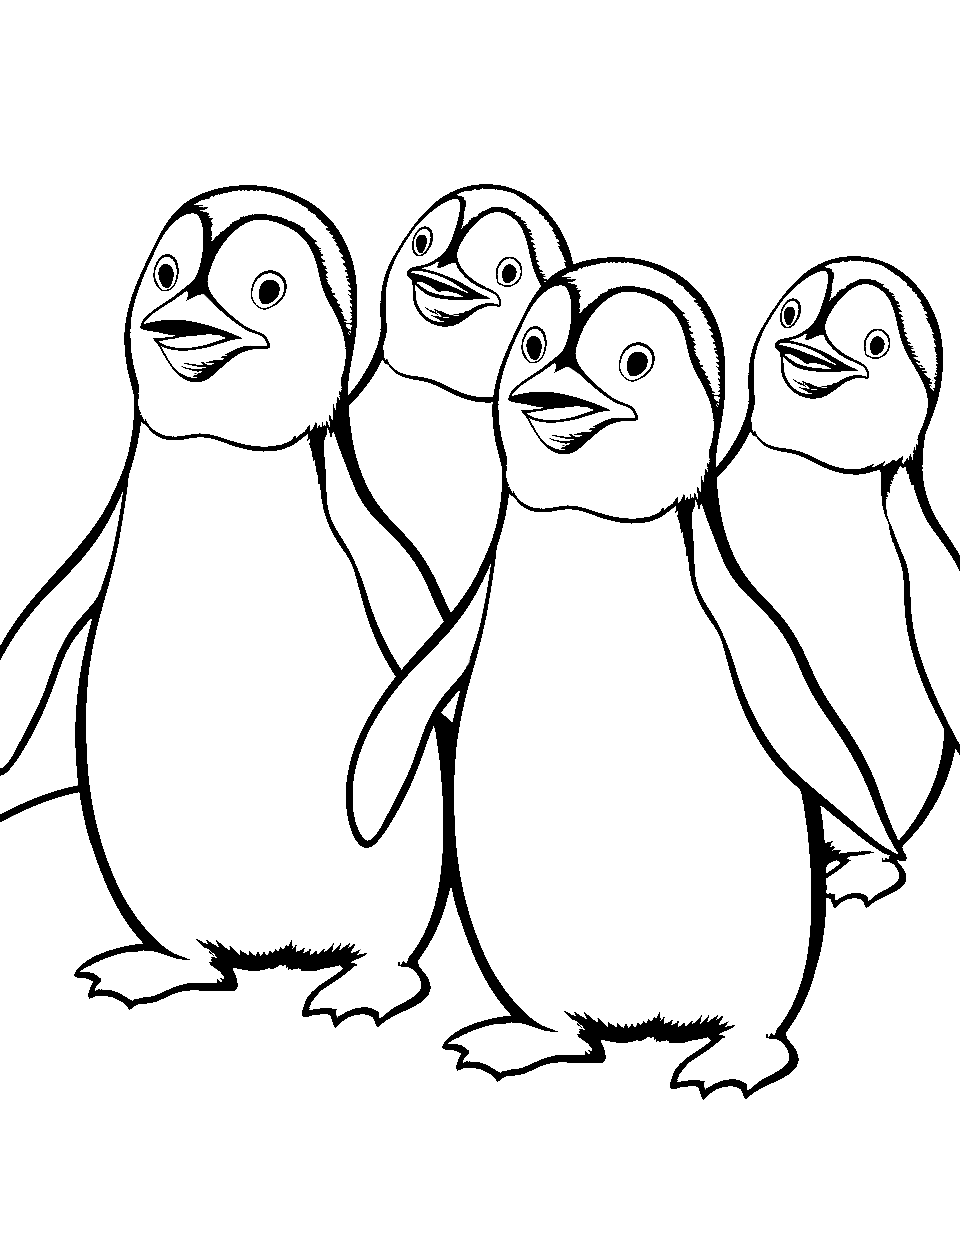 Penguin Parade Coloring Page - A group of penguins waddling on ice.